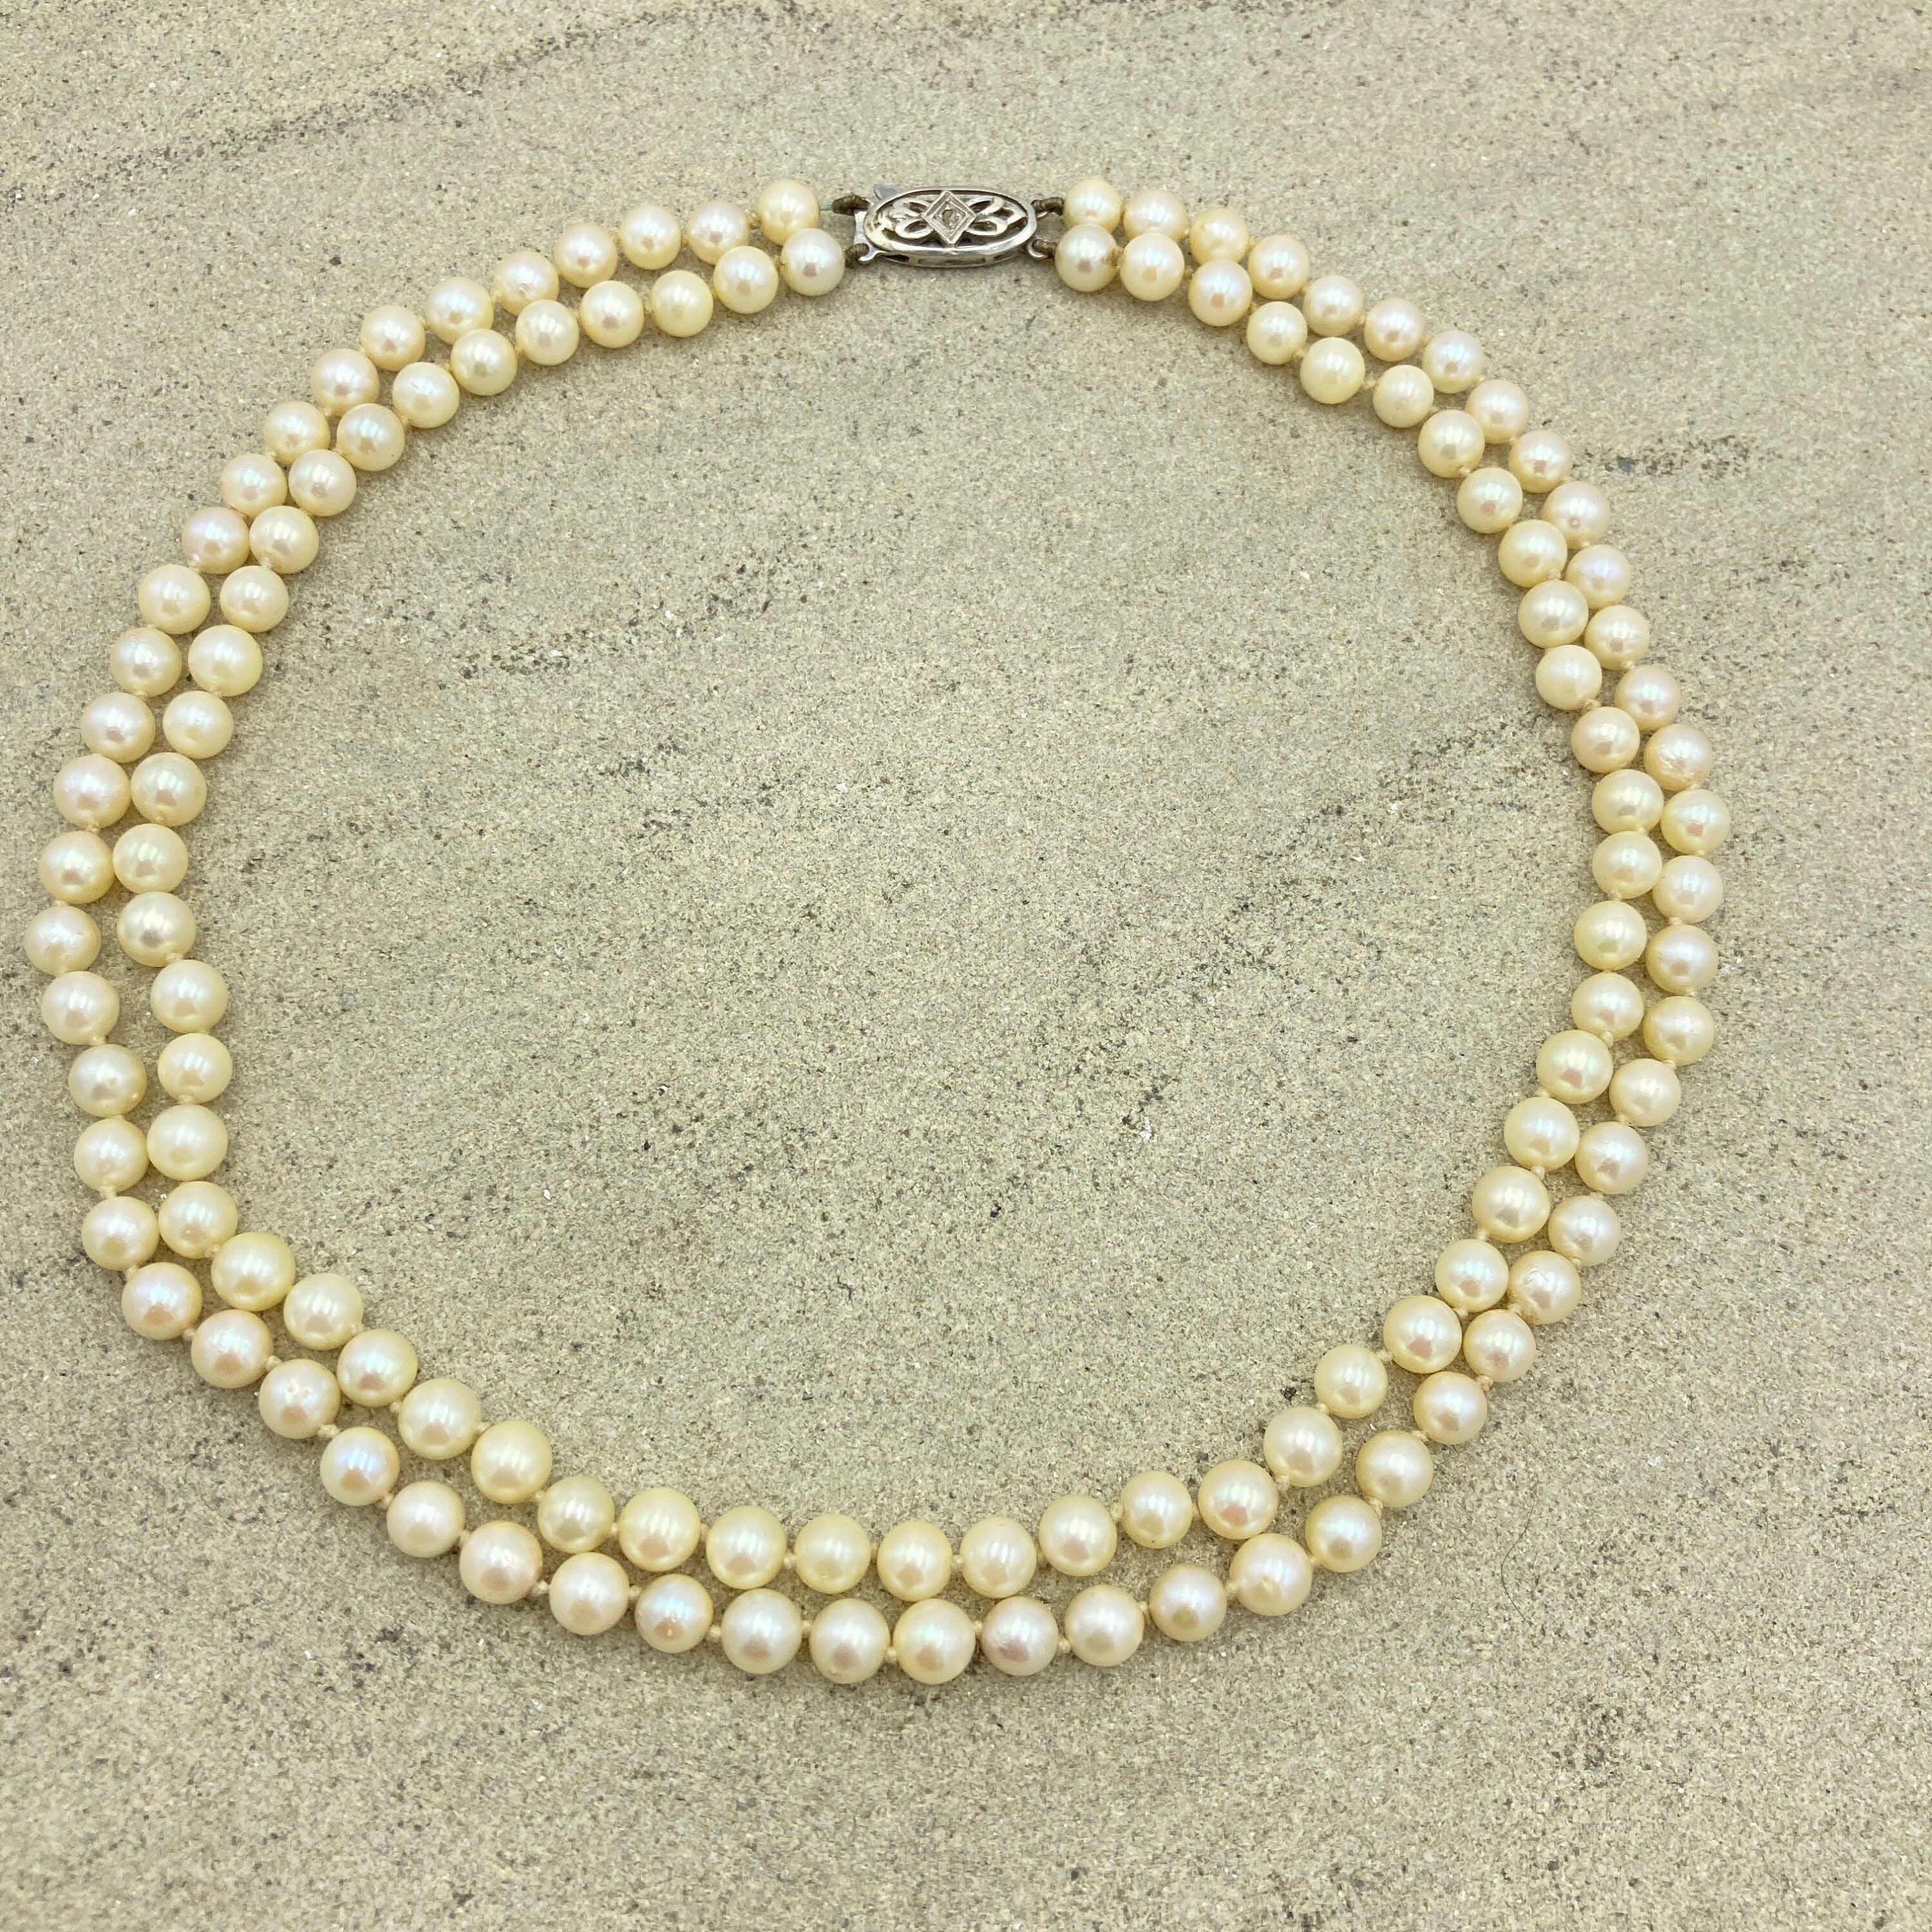 Vintage Double string hand knotted cultured pearls , 9ct white gold & diamond chip clasp, c1920s/30s